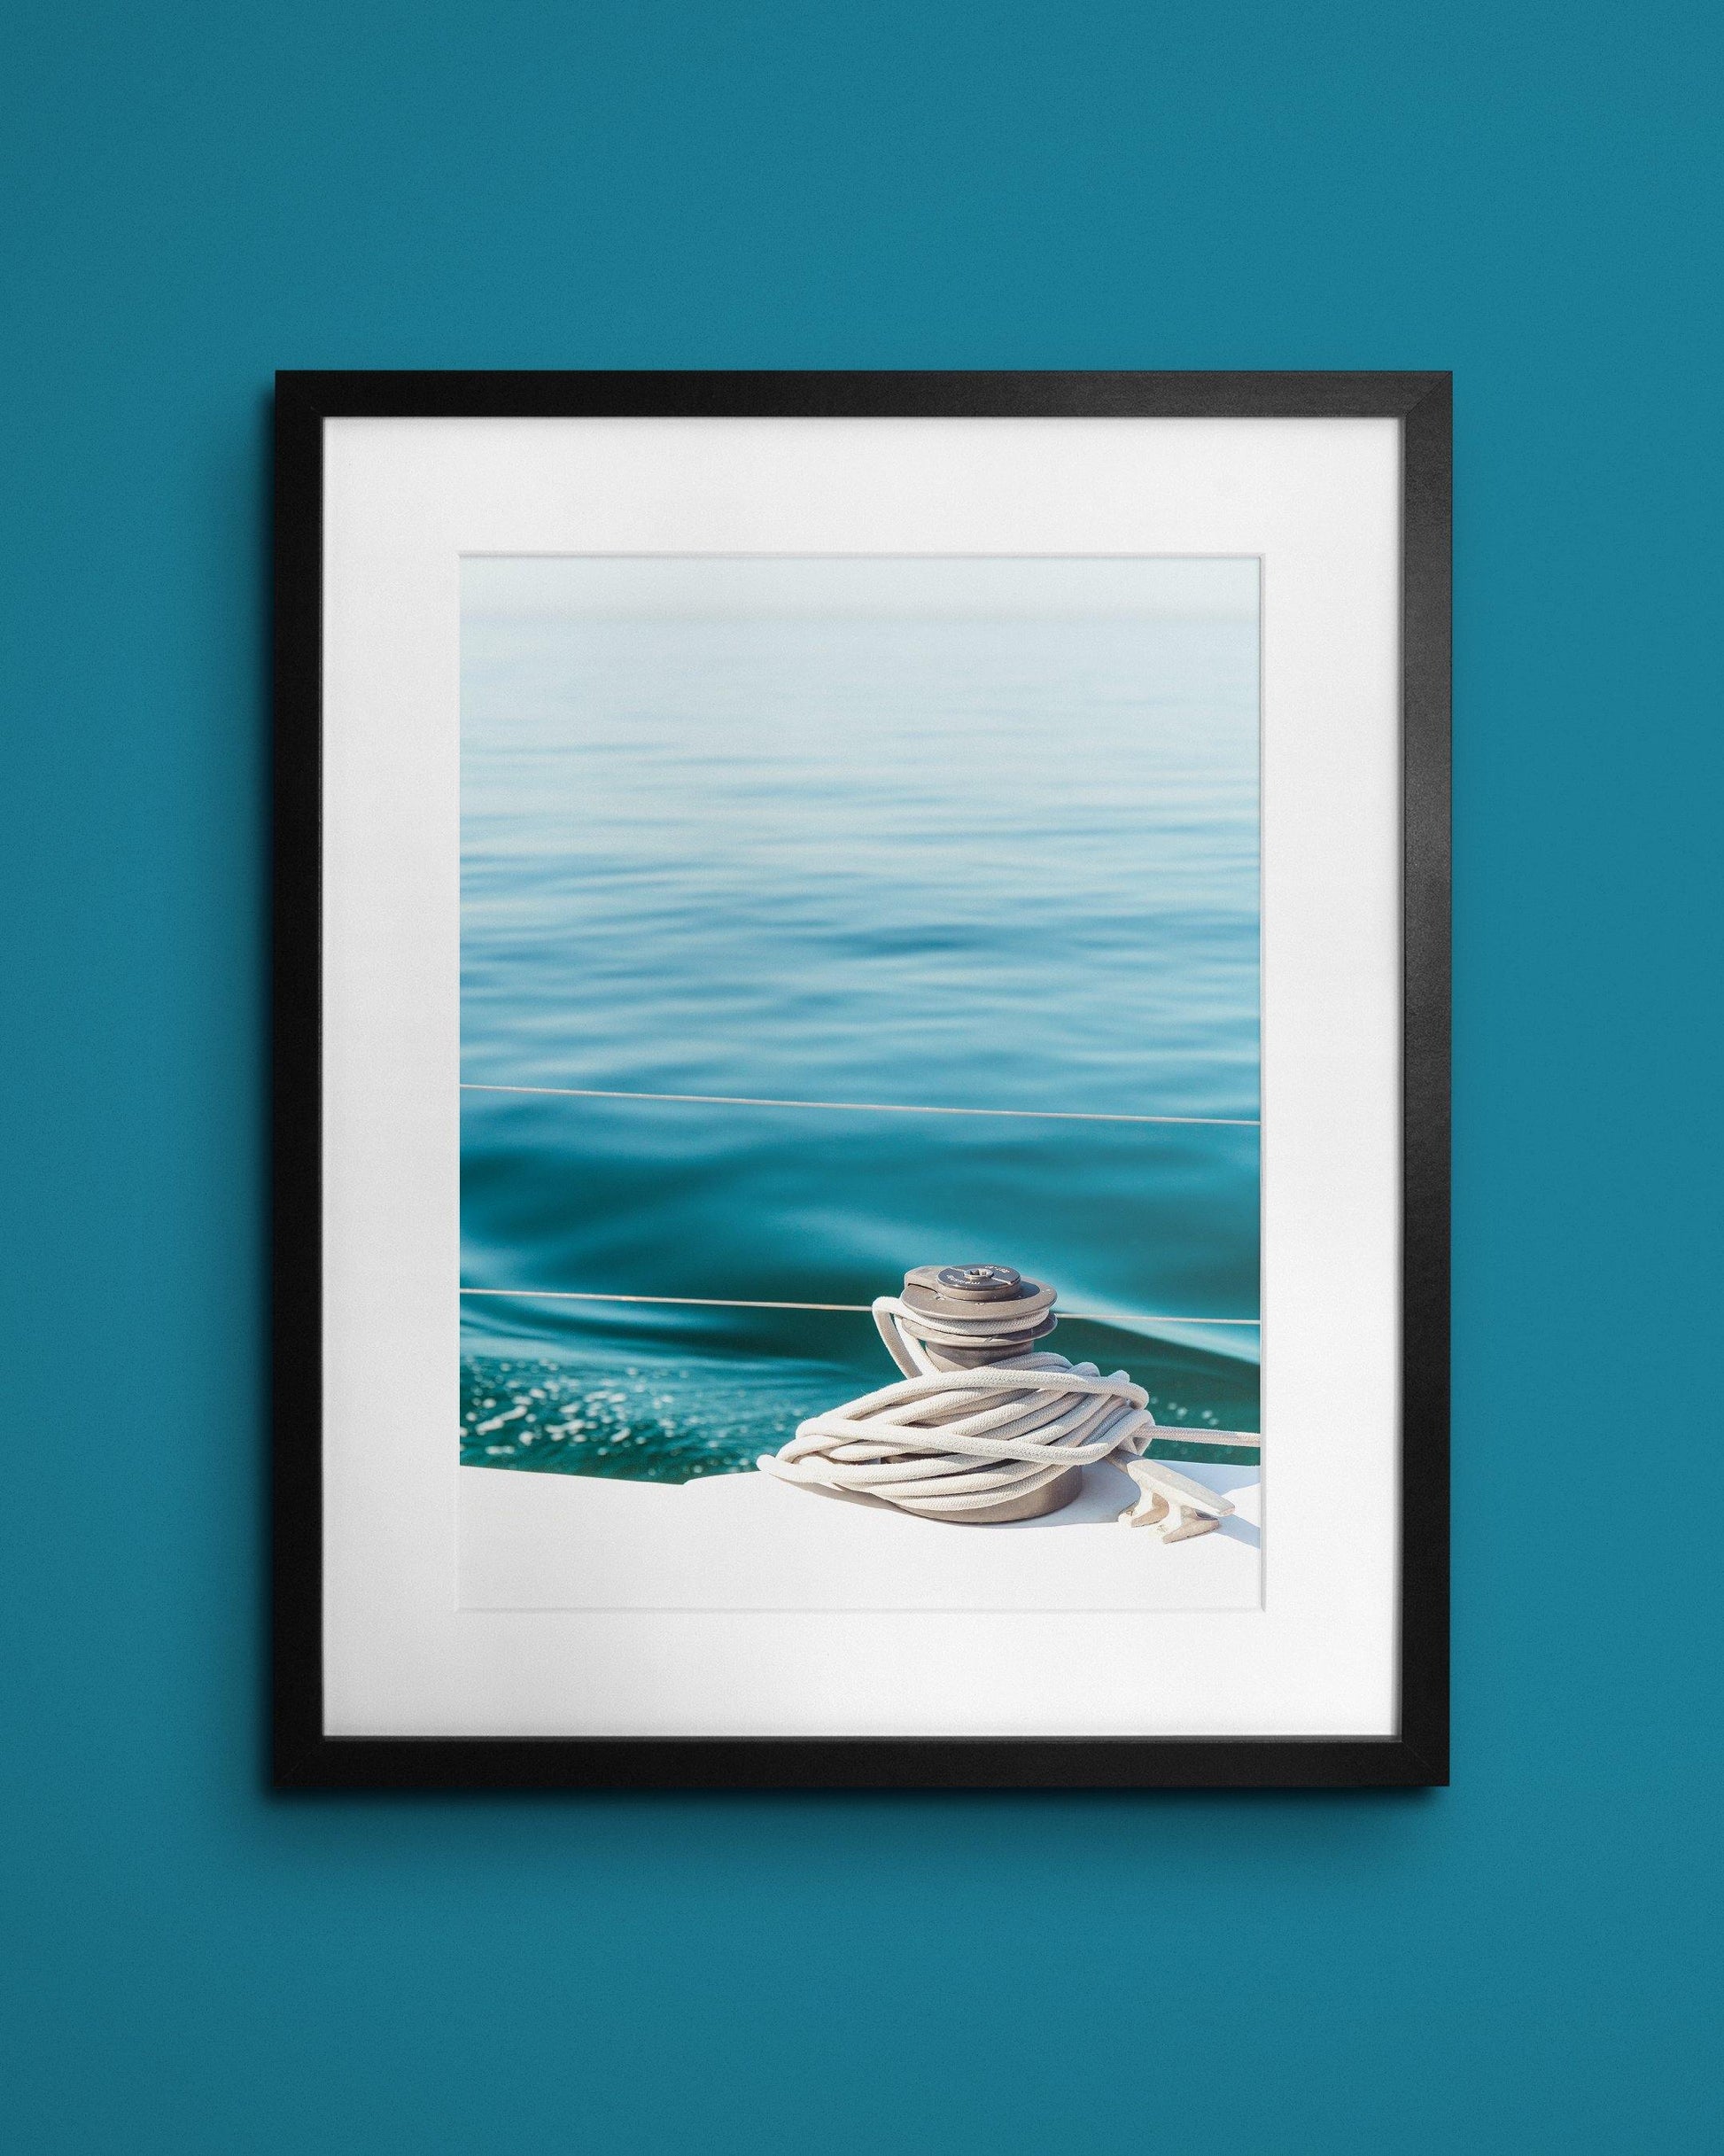 Fine-art print called Calm day at sea from Kaj on the wall